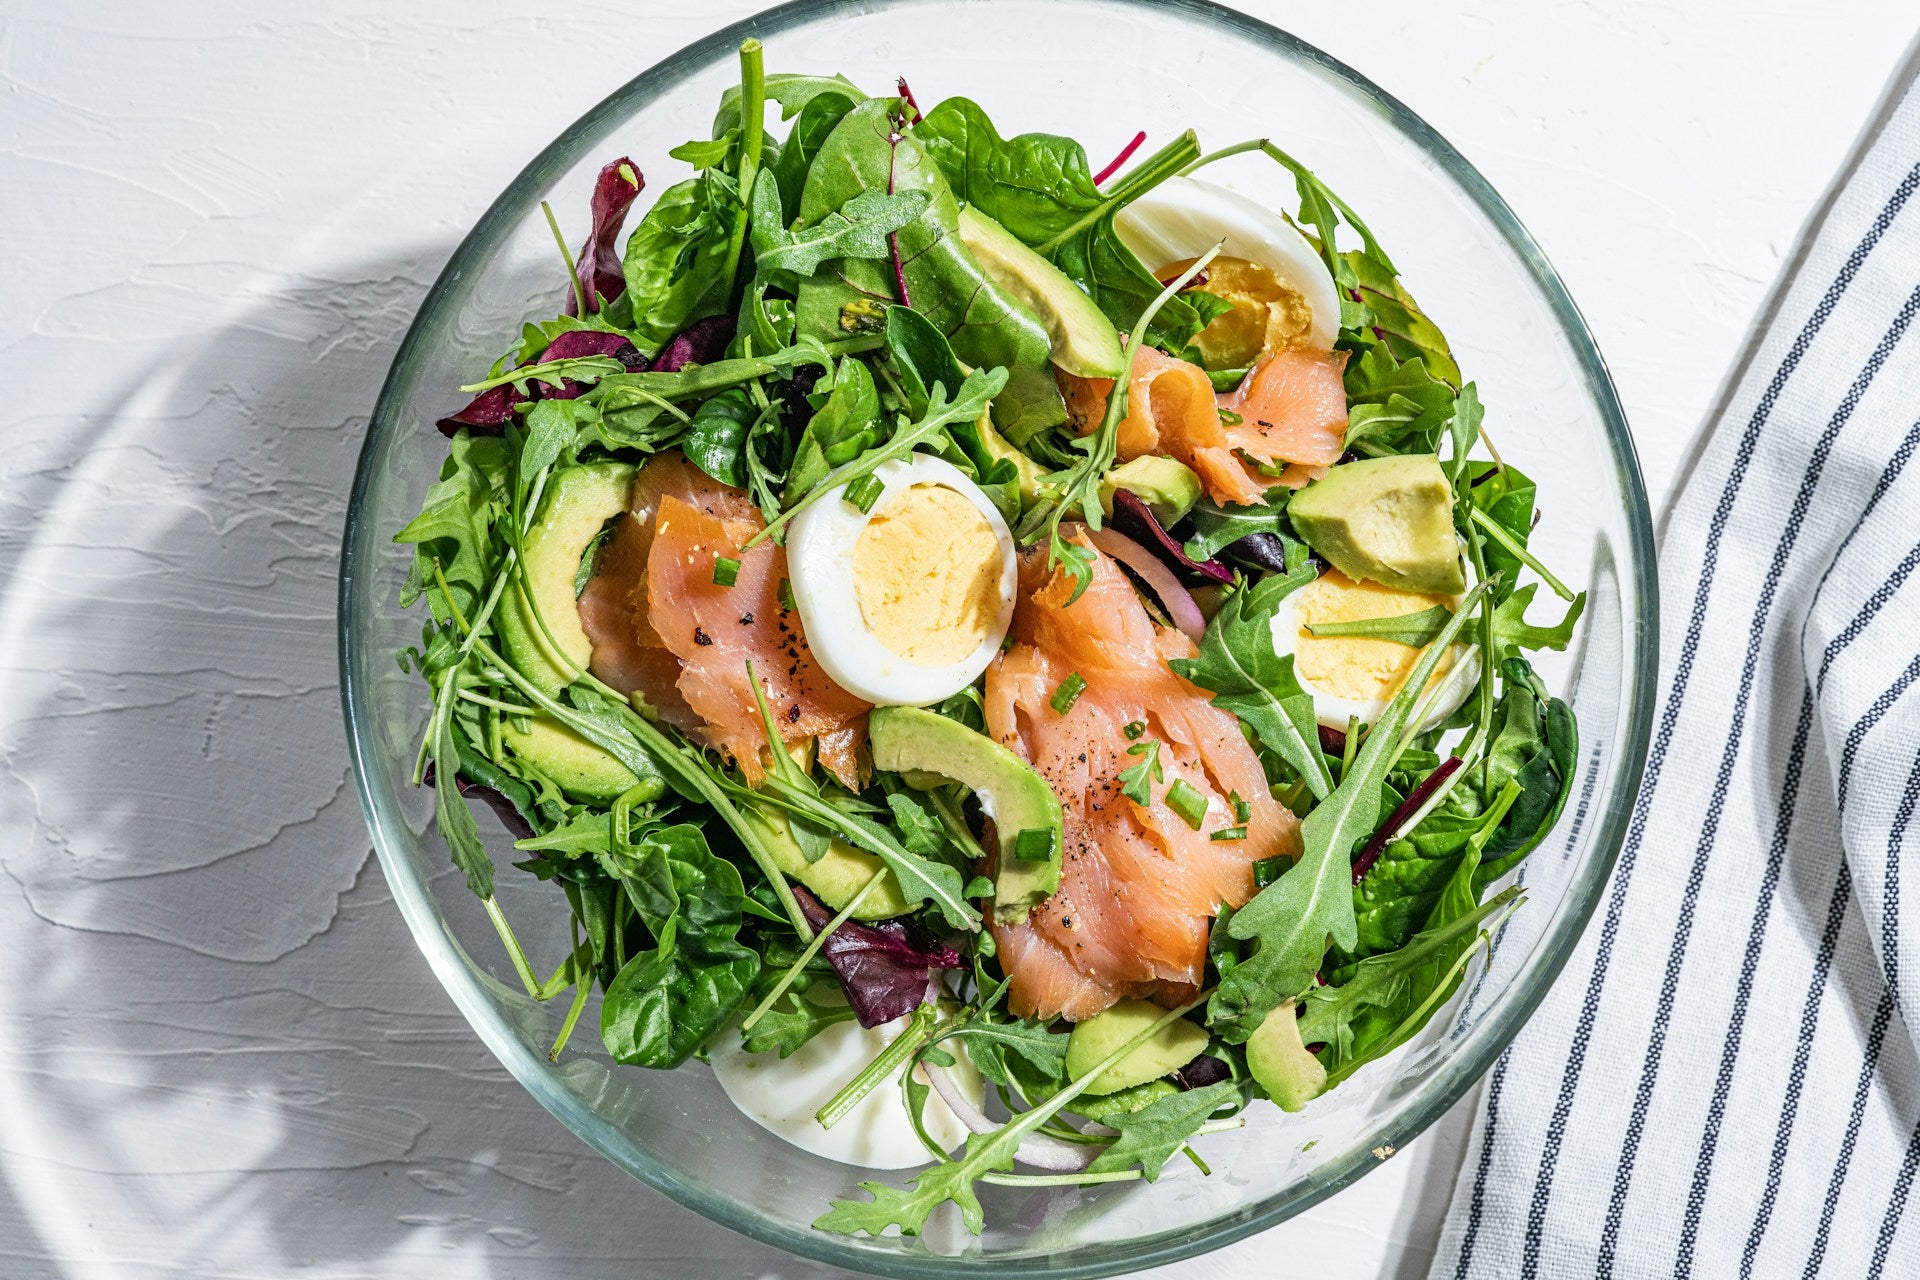 A bright green nutrient-rich salad with foods to support a calm central nervous system